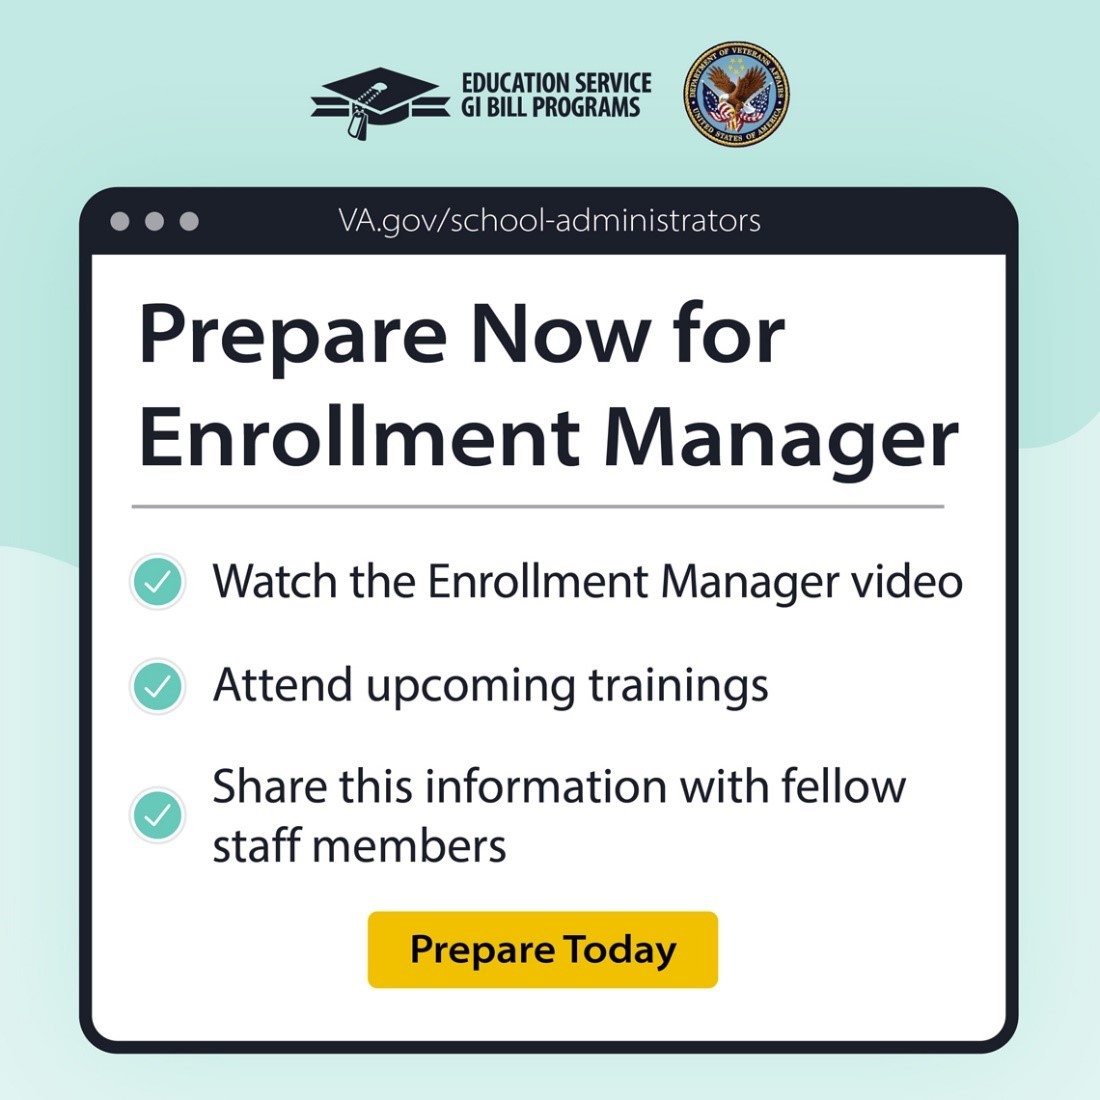 Prepare Now for Enrollment Manager